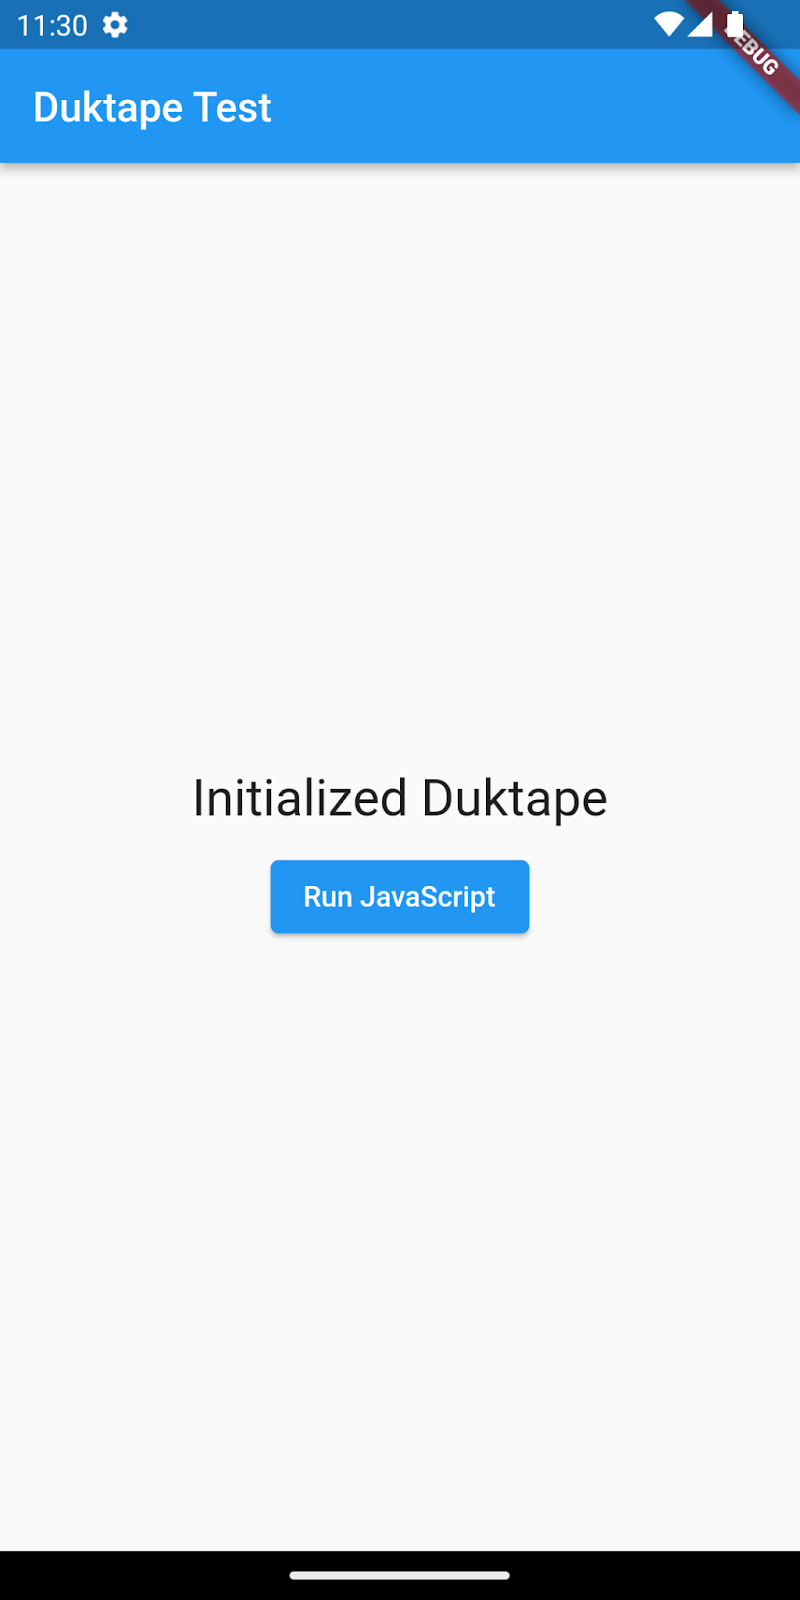 Showing Duktape initialized in an Android emulator